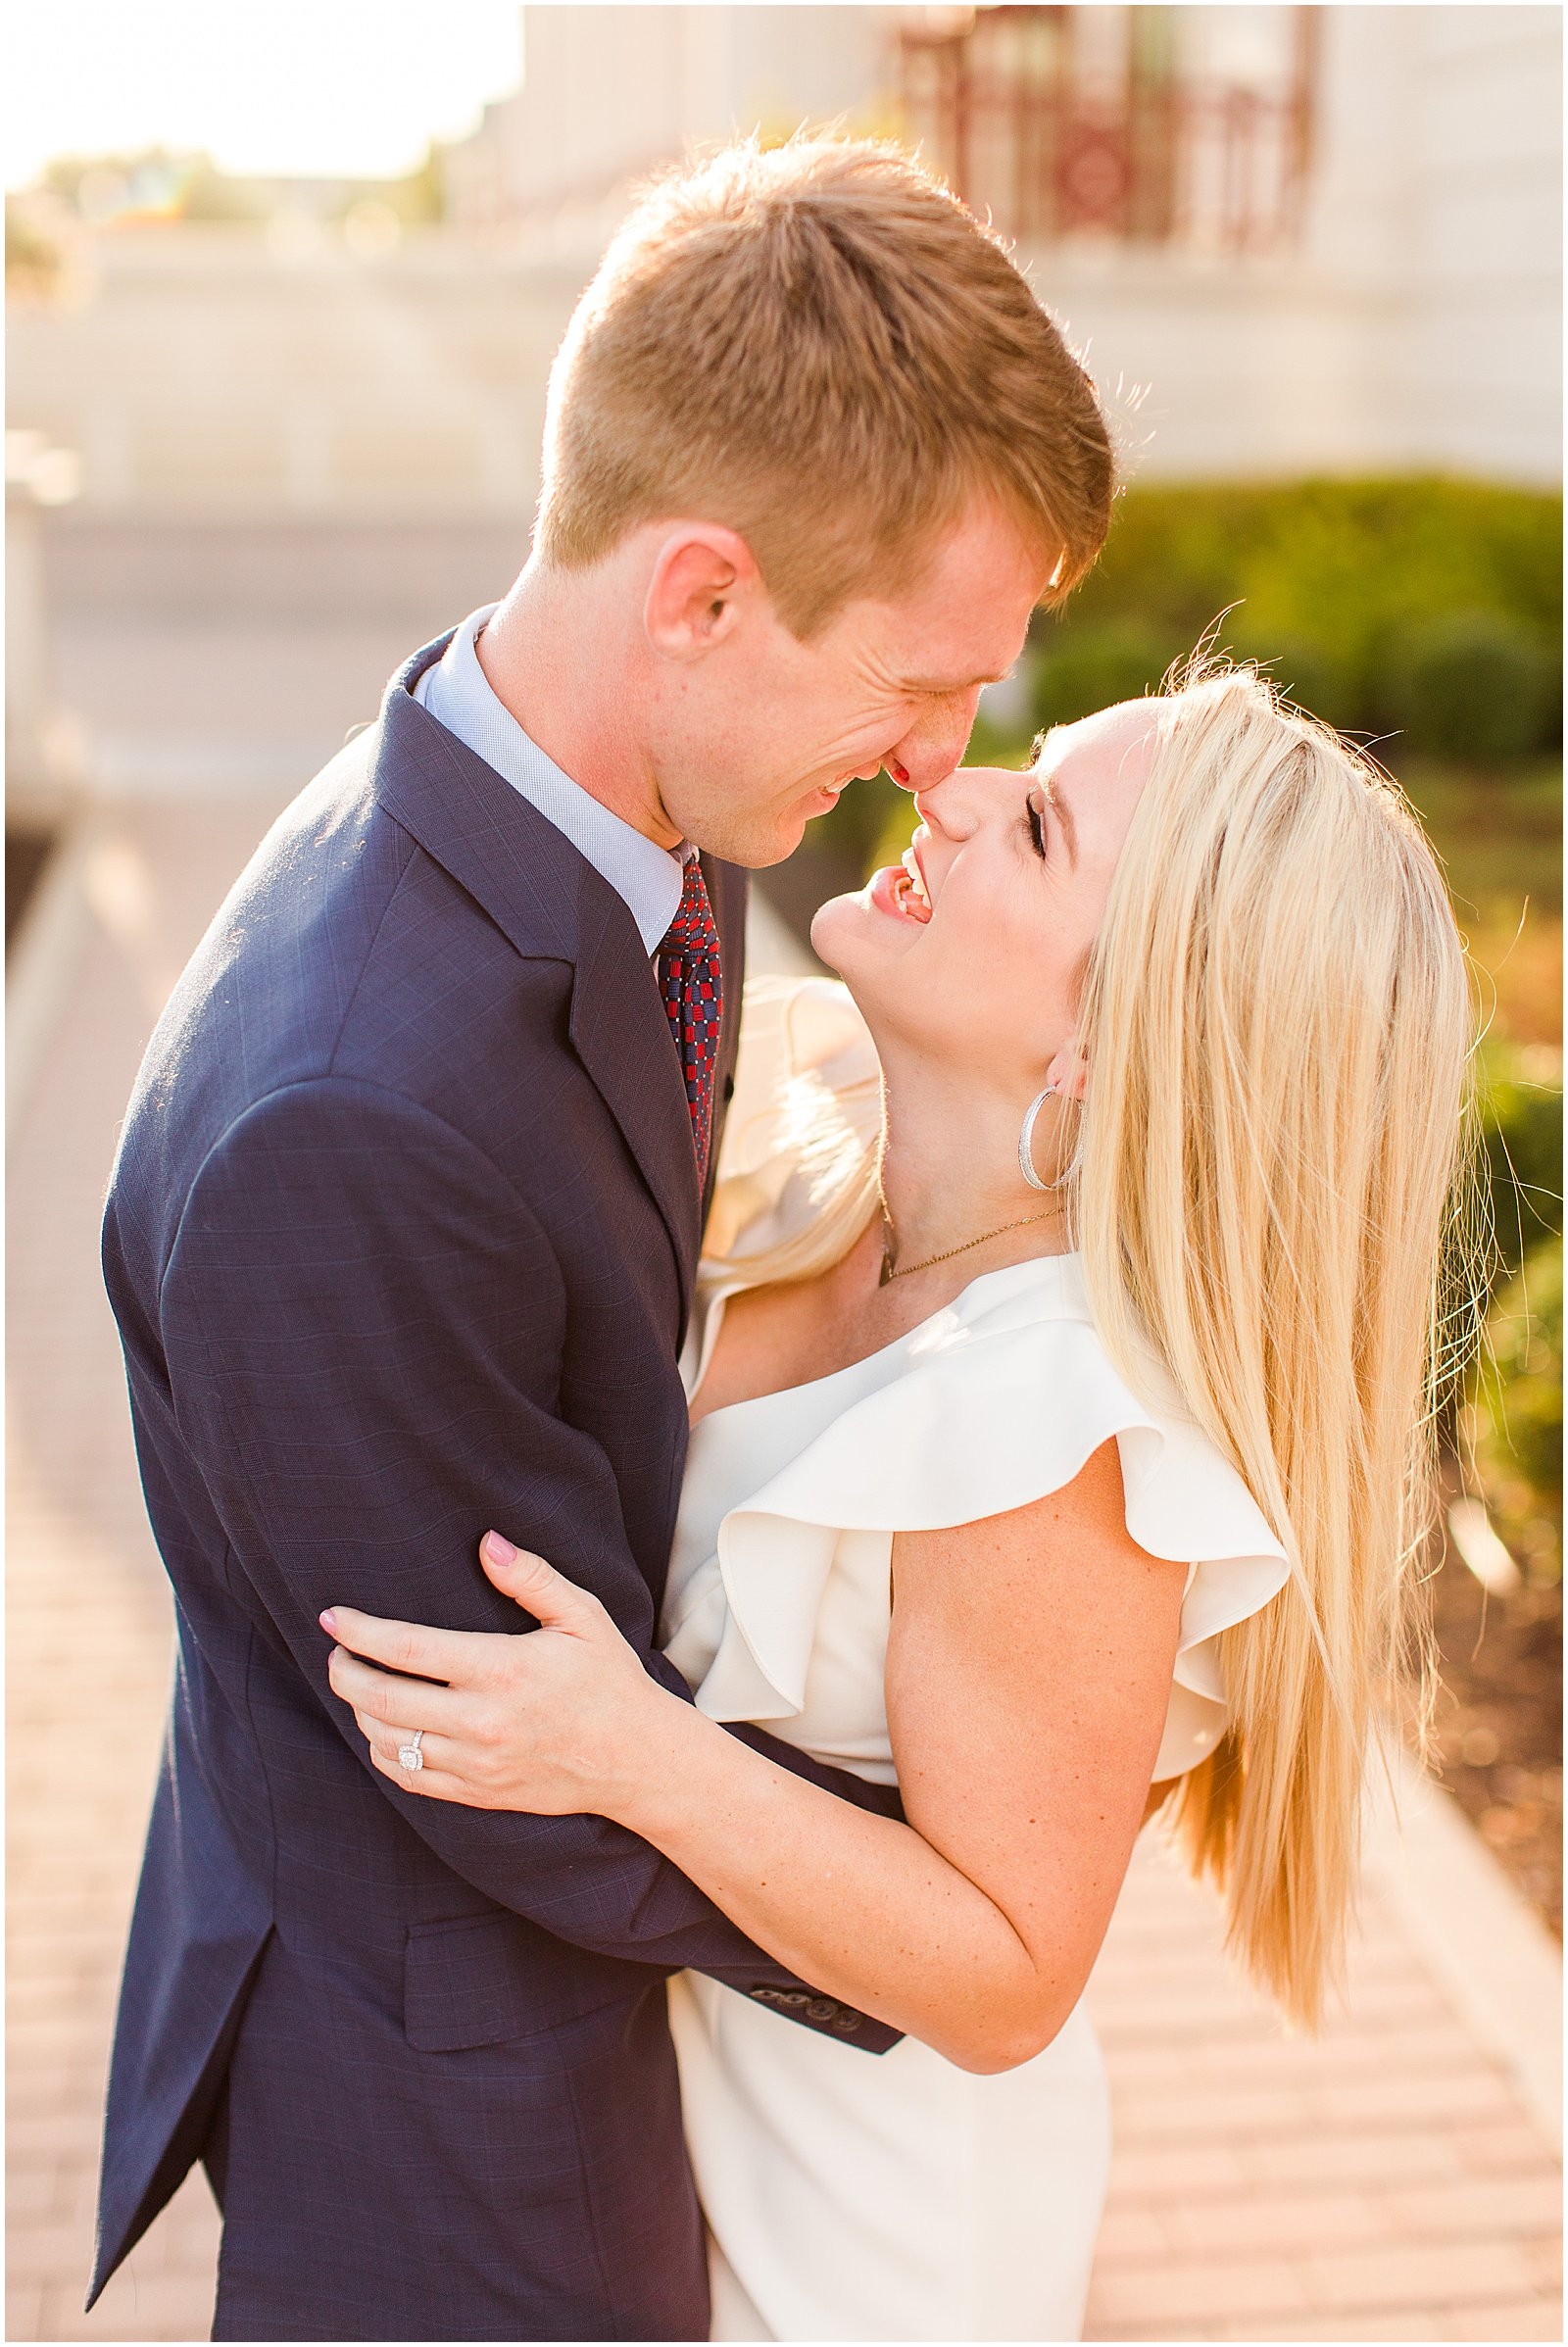 A Cute and Cuddly Engagement Session in Carmel, IN | Abbi and Josh0015.jpg